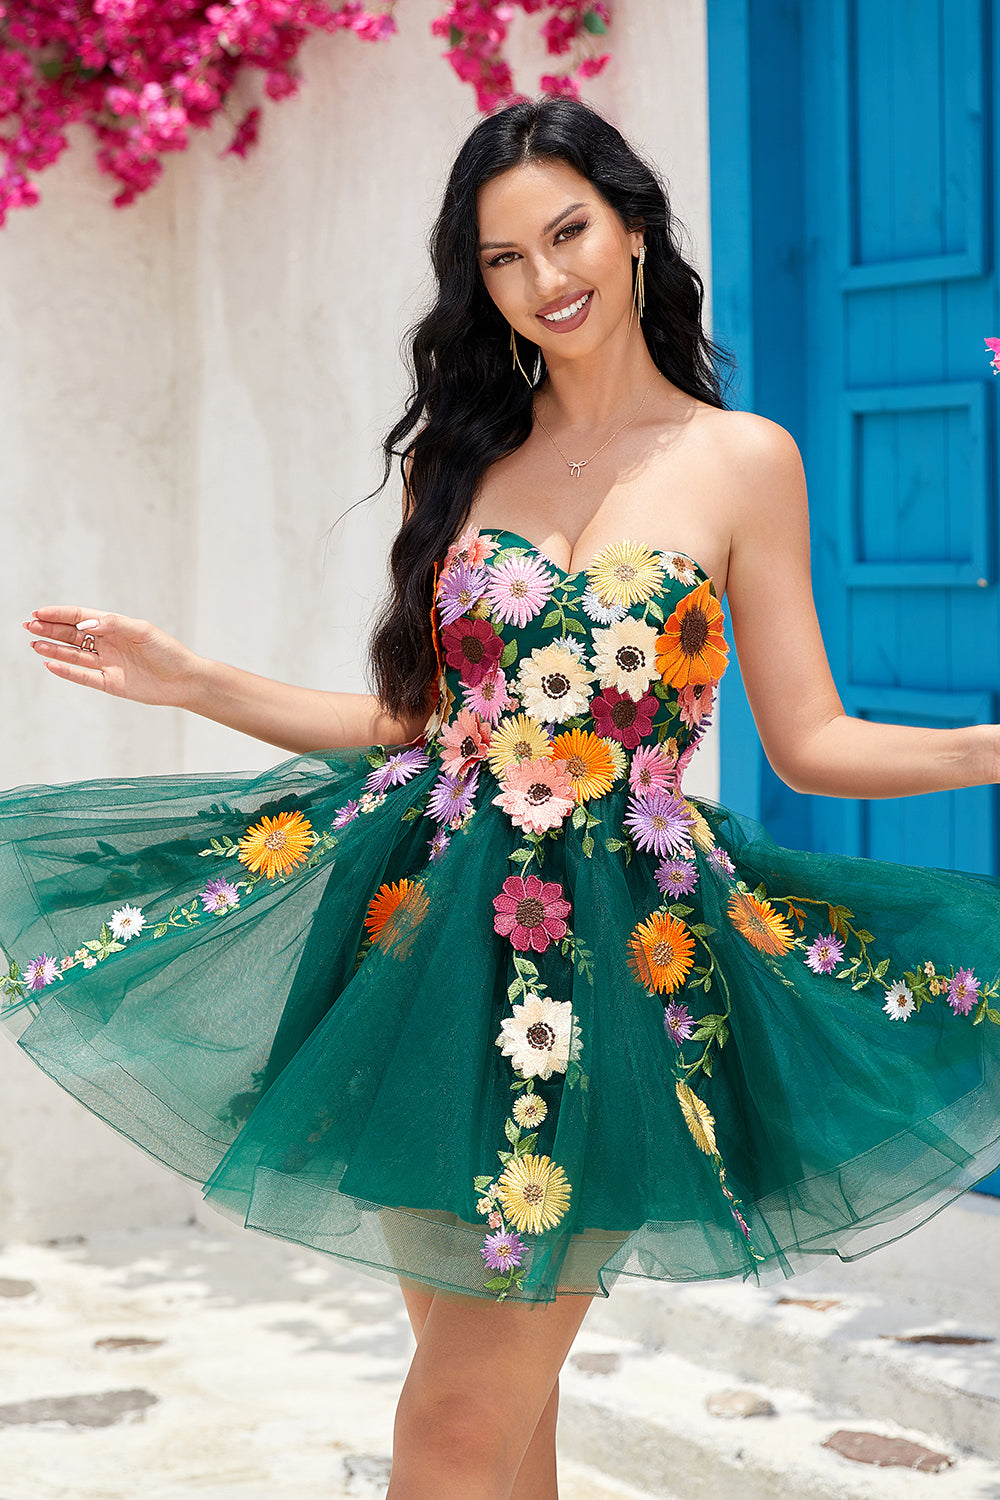 Dark Green Homecoming Dress With 3D Lace Flowers – Lisposa